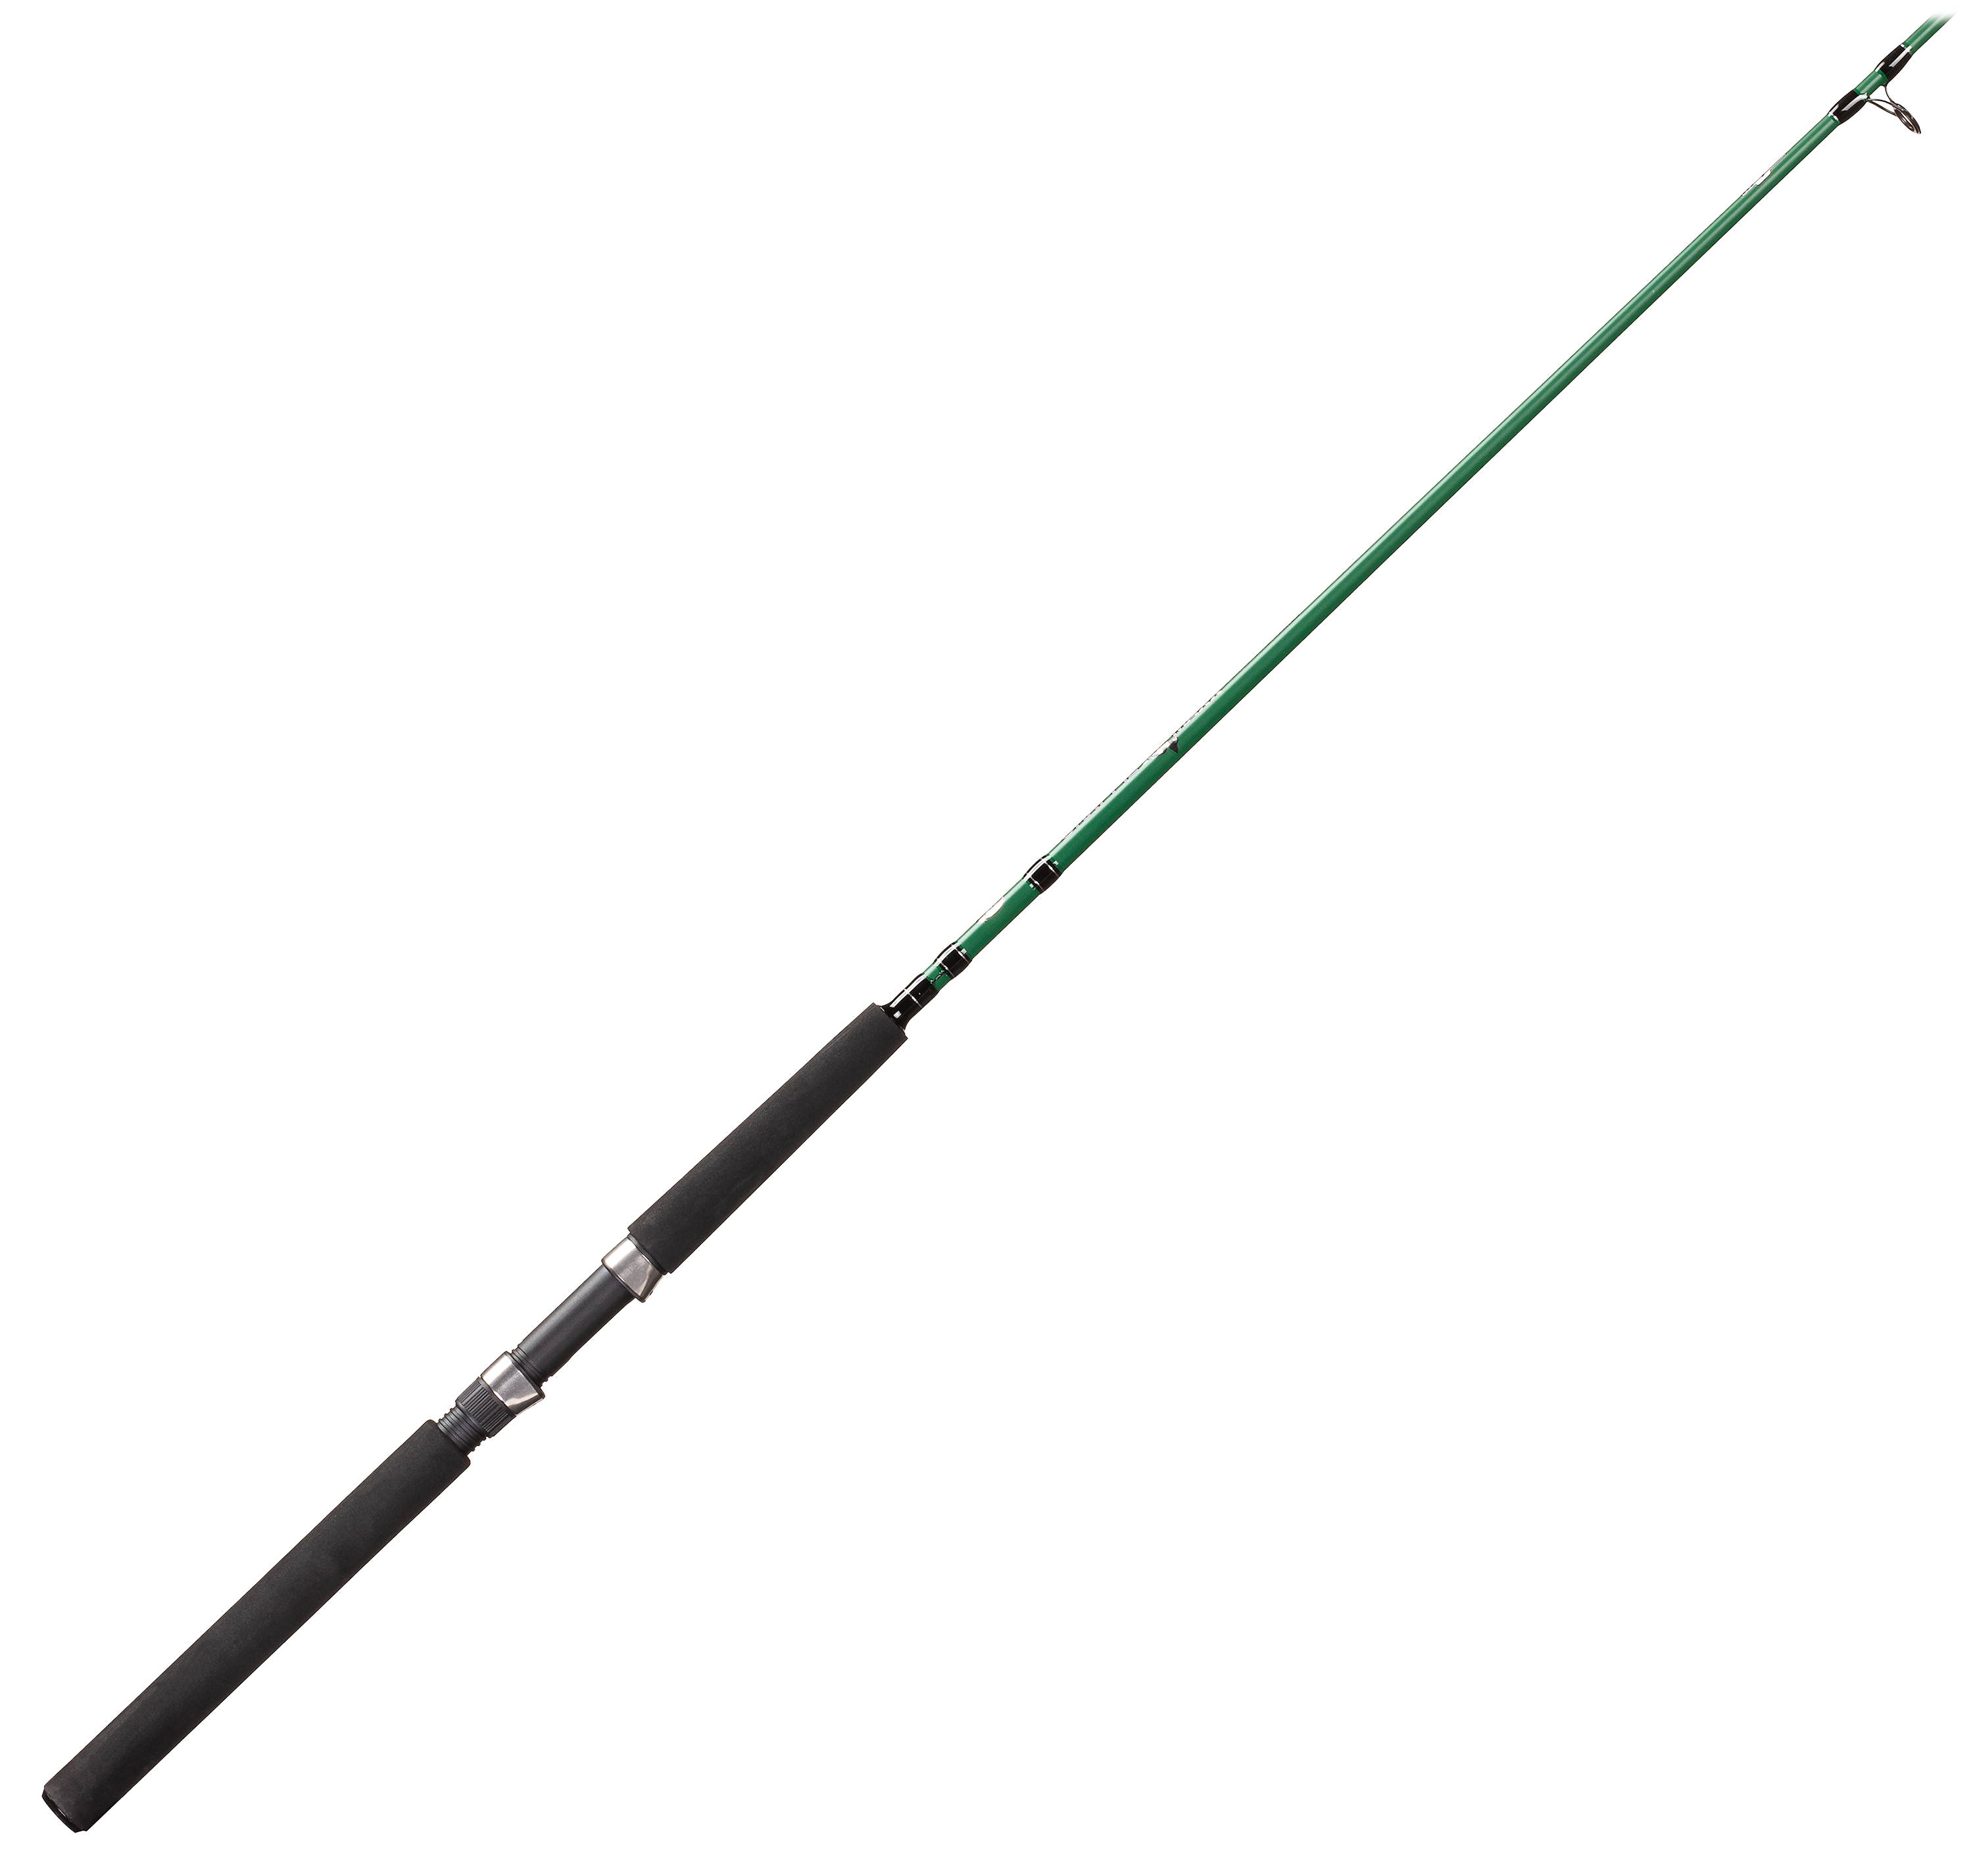 Bass Pro Shops Crappie Maxx Signature Series Crappie Rod - 12' - Light - Moderate - 2 Pieces - C